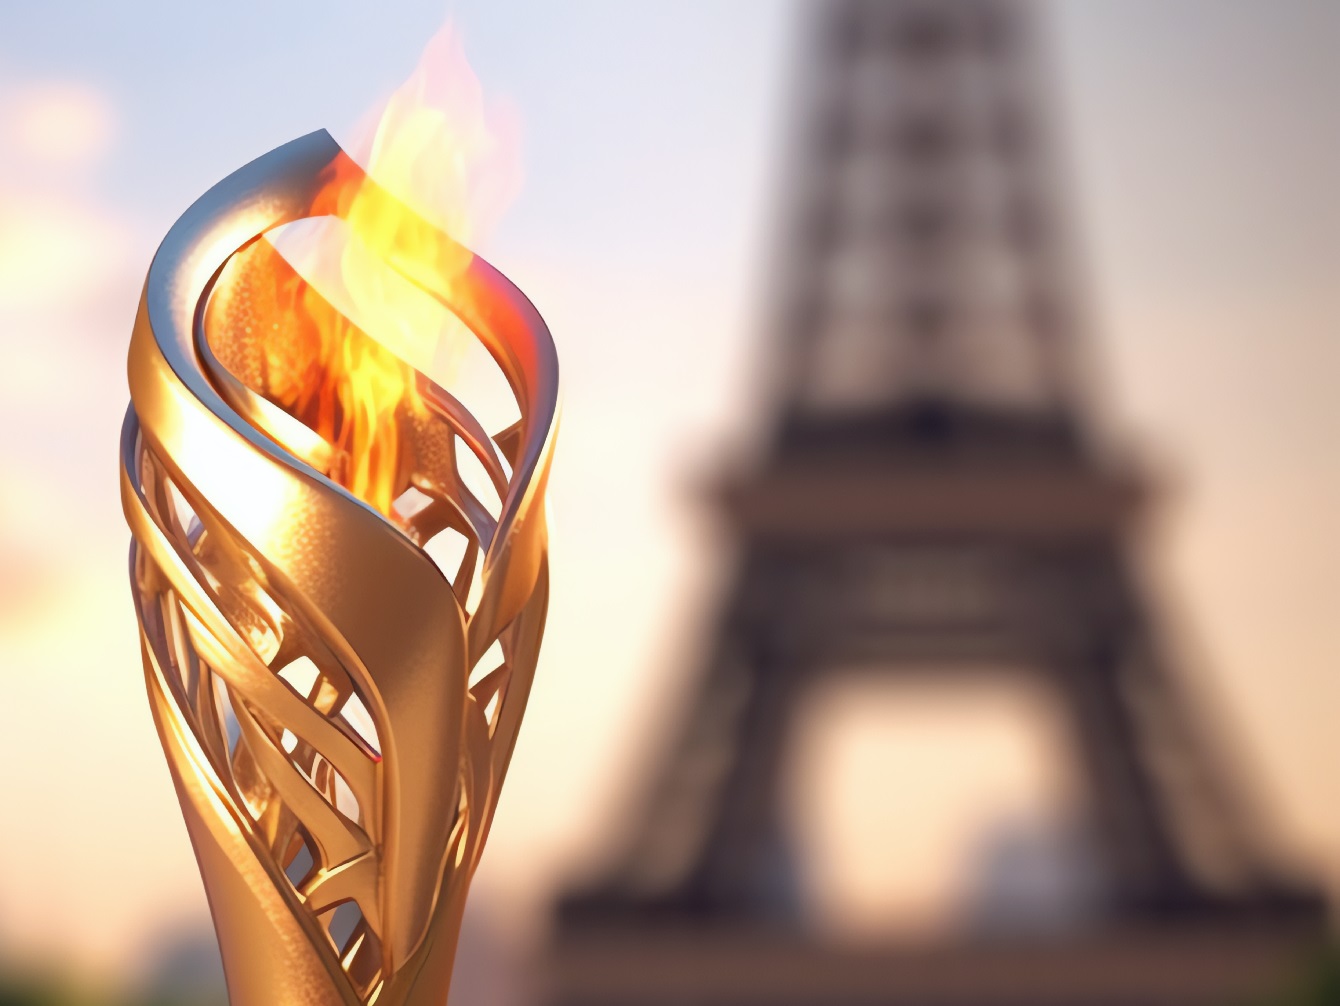 Olympic flame in front of the Eiffel Tower